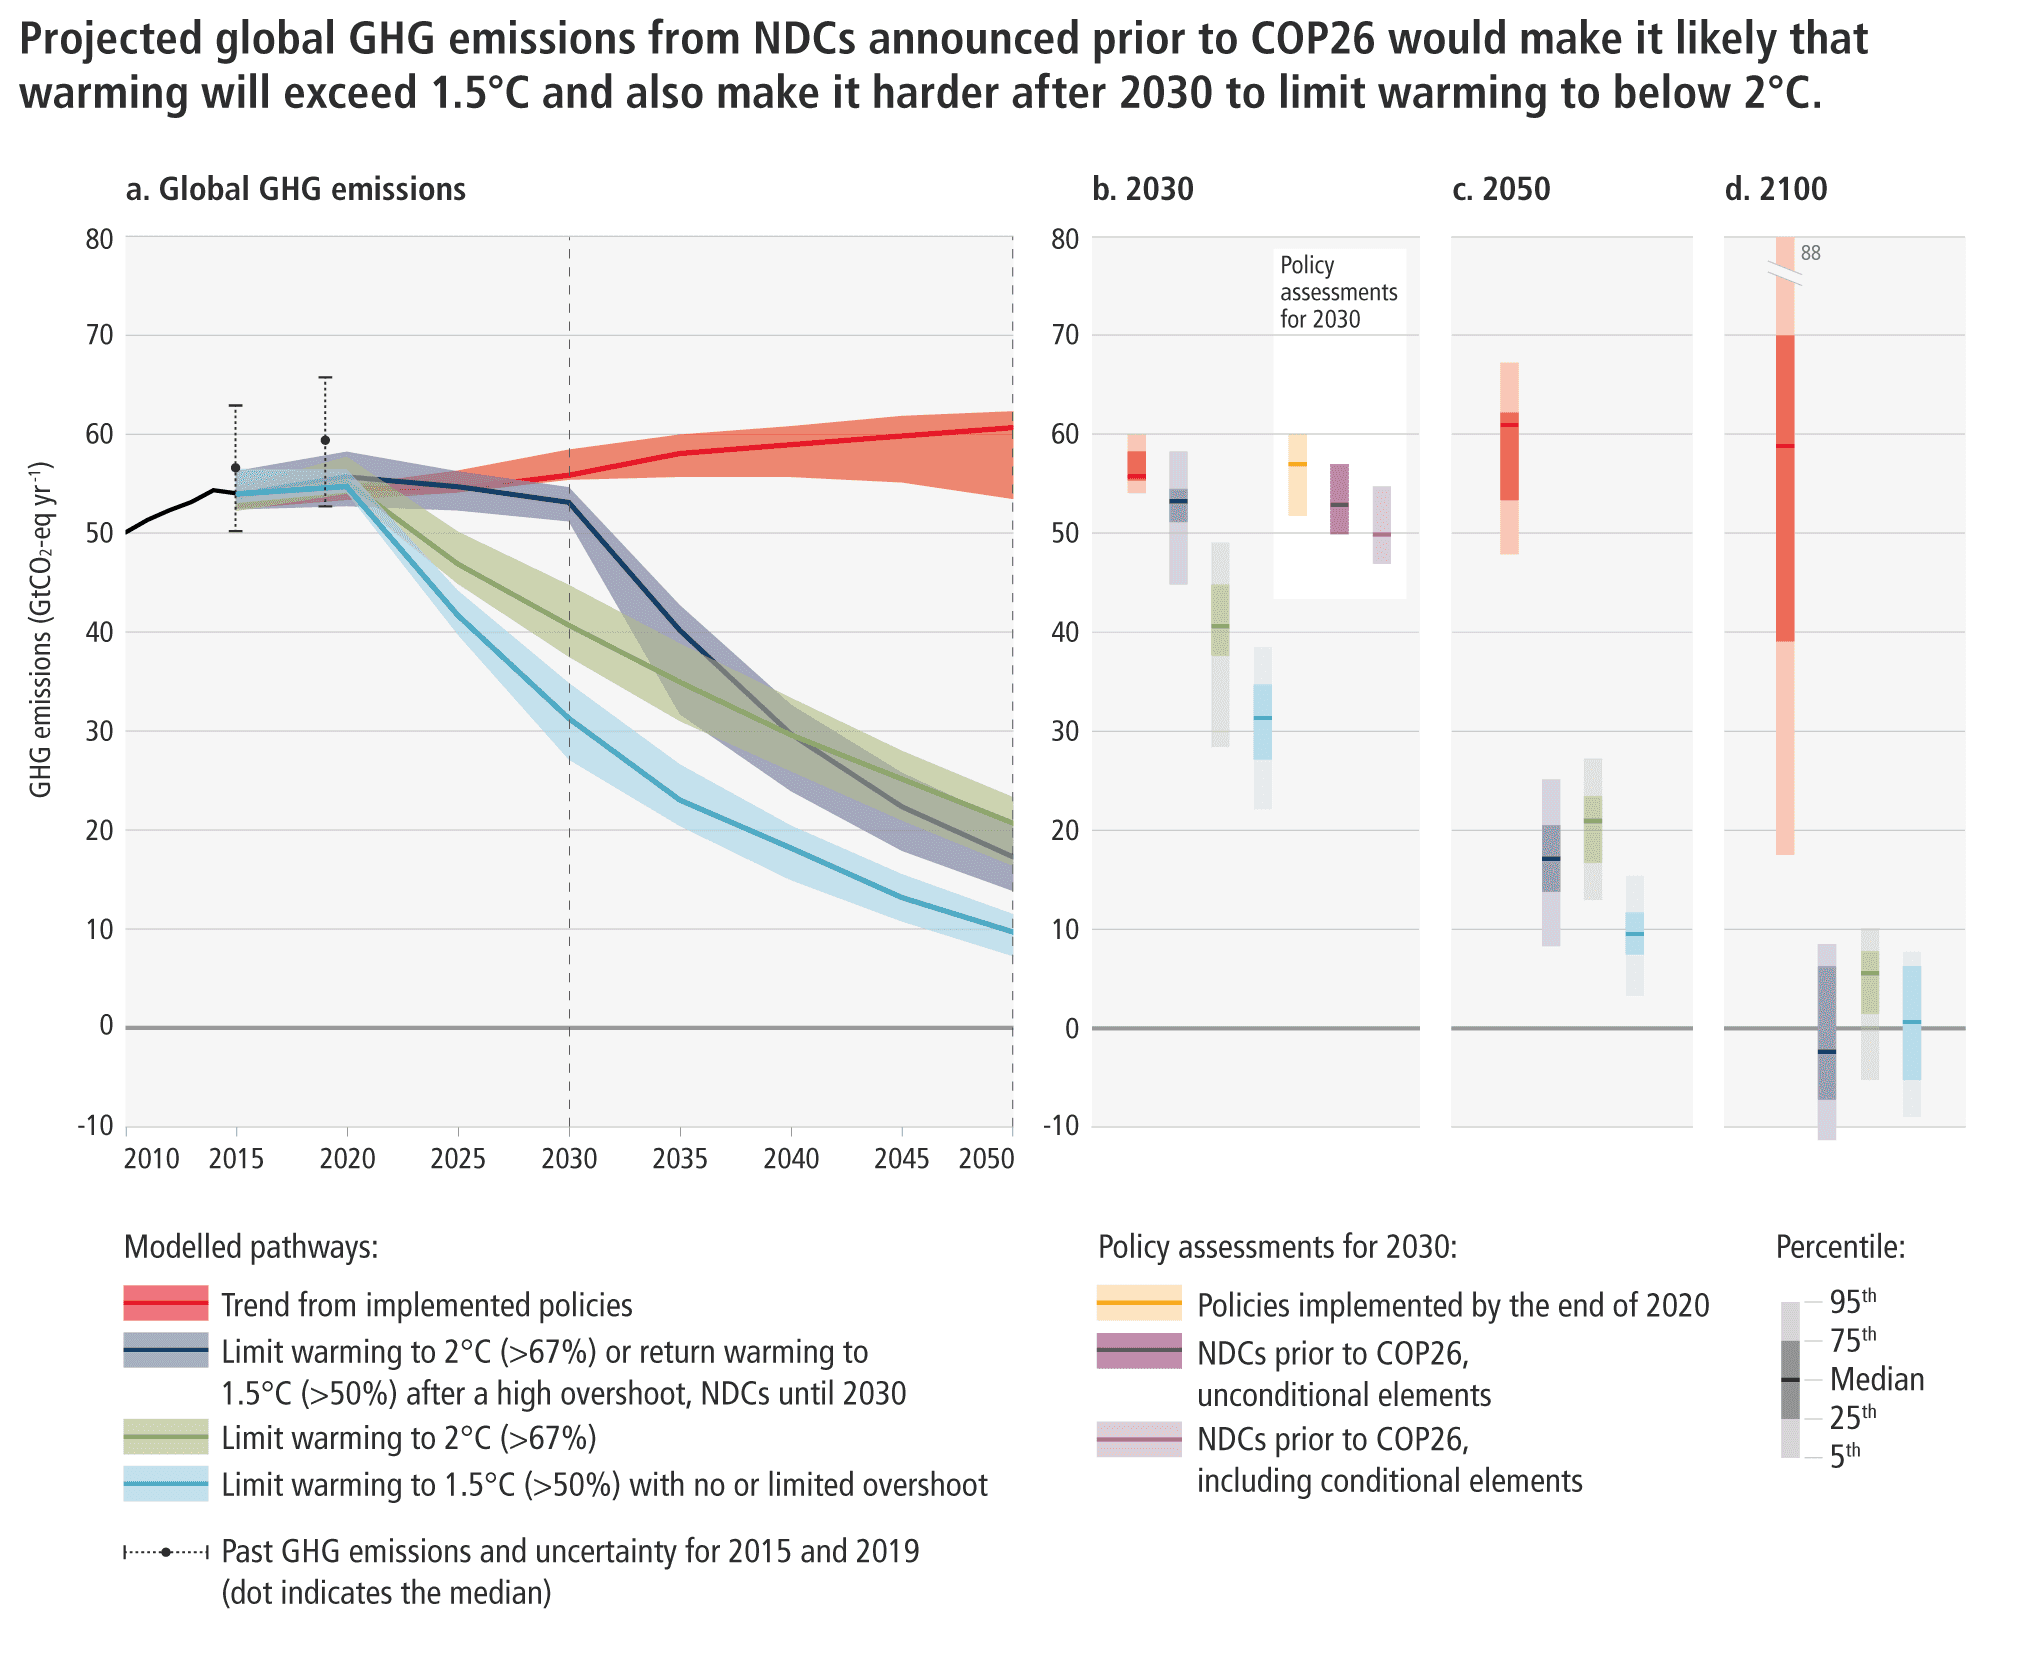 Global net anthropogenic greenhouse gas emissions projected to 2050. Projected global GHG emissions from Nationally Determined Contribution (NDCs) announced prior to COP26 would make it likely that warming will exceed 1.5°C and also make it harder after 2030 to limit warming to below 2°C. Graphic: IPCC